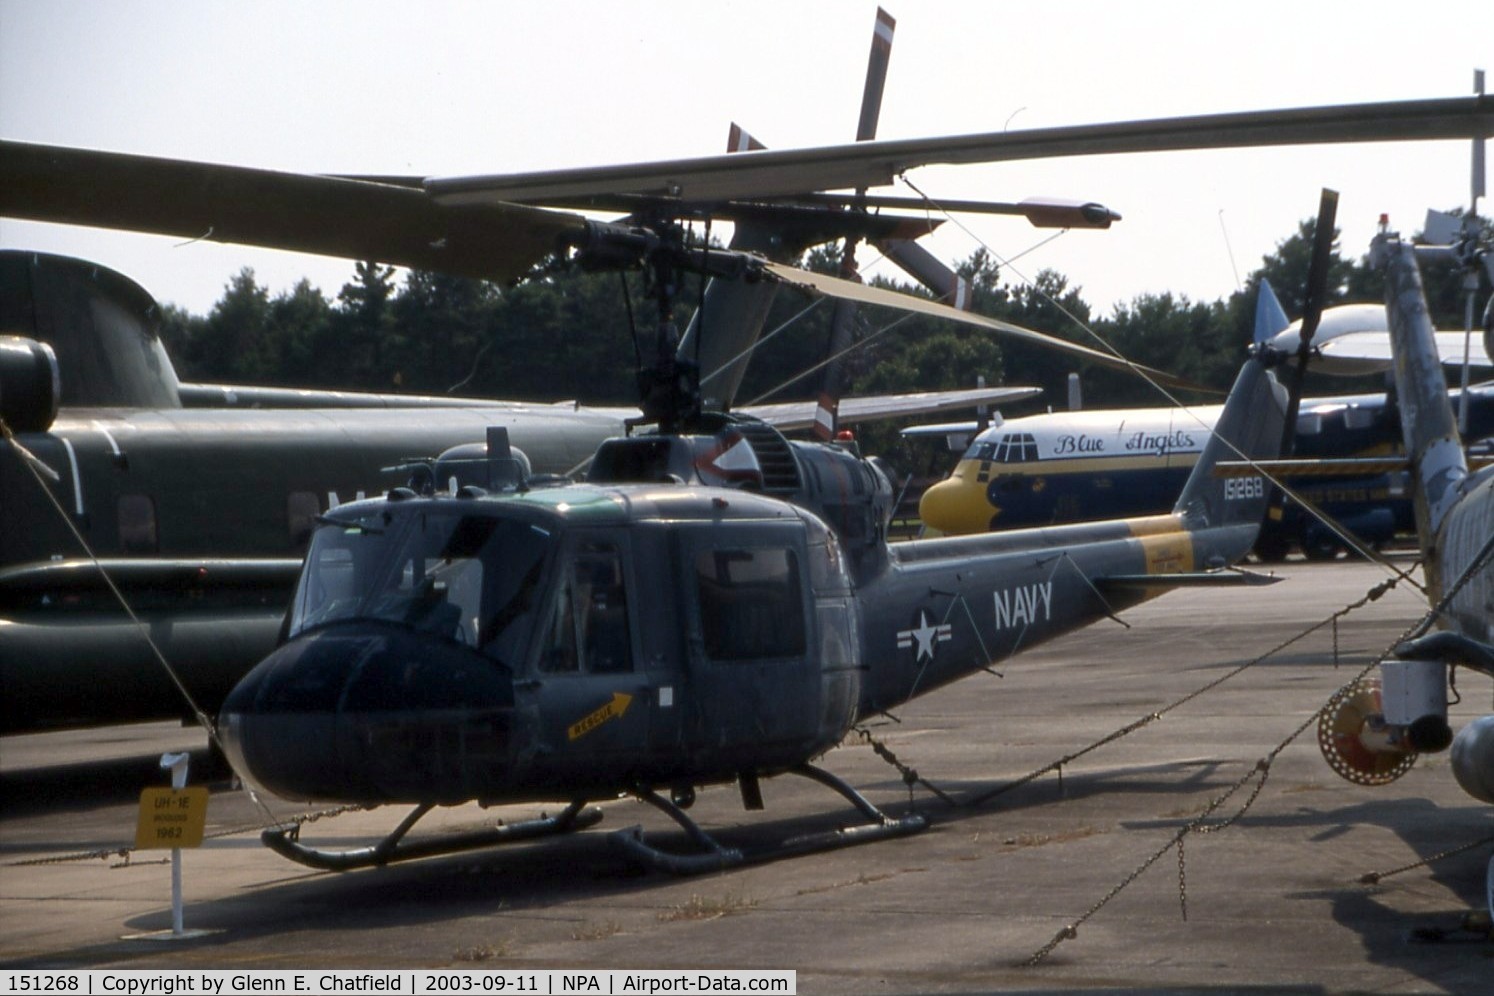 151268, 1964 Bell UH-1E Iroquois C/N 6003, UH-1E at the National Museum of Naval Aviation